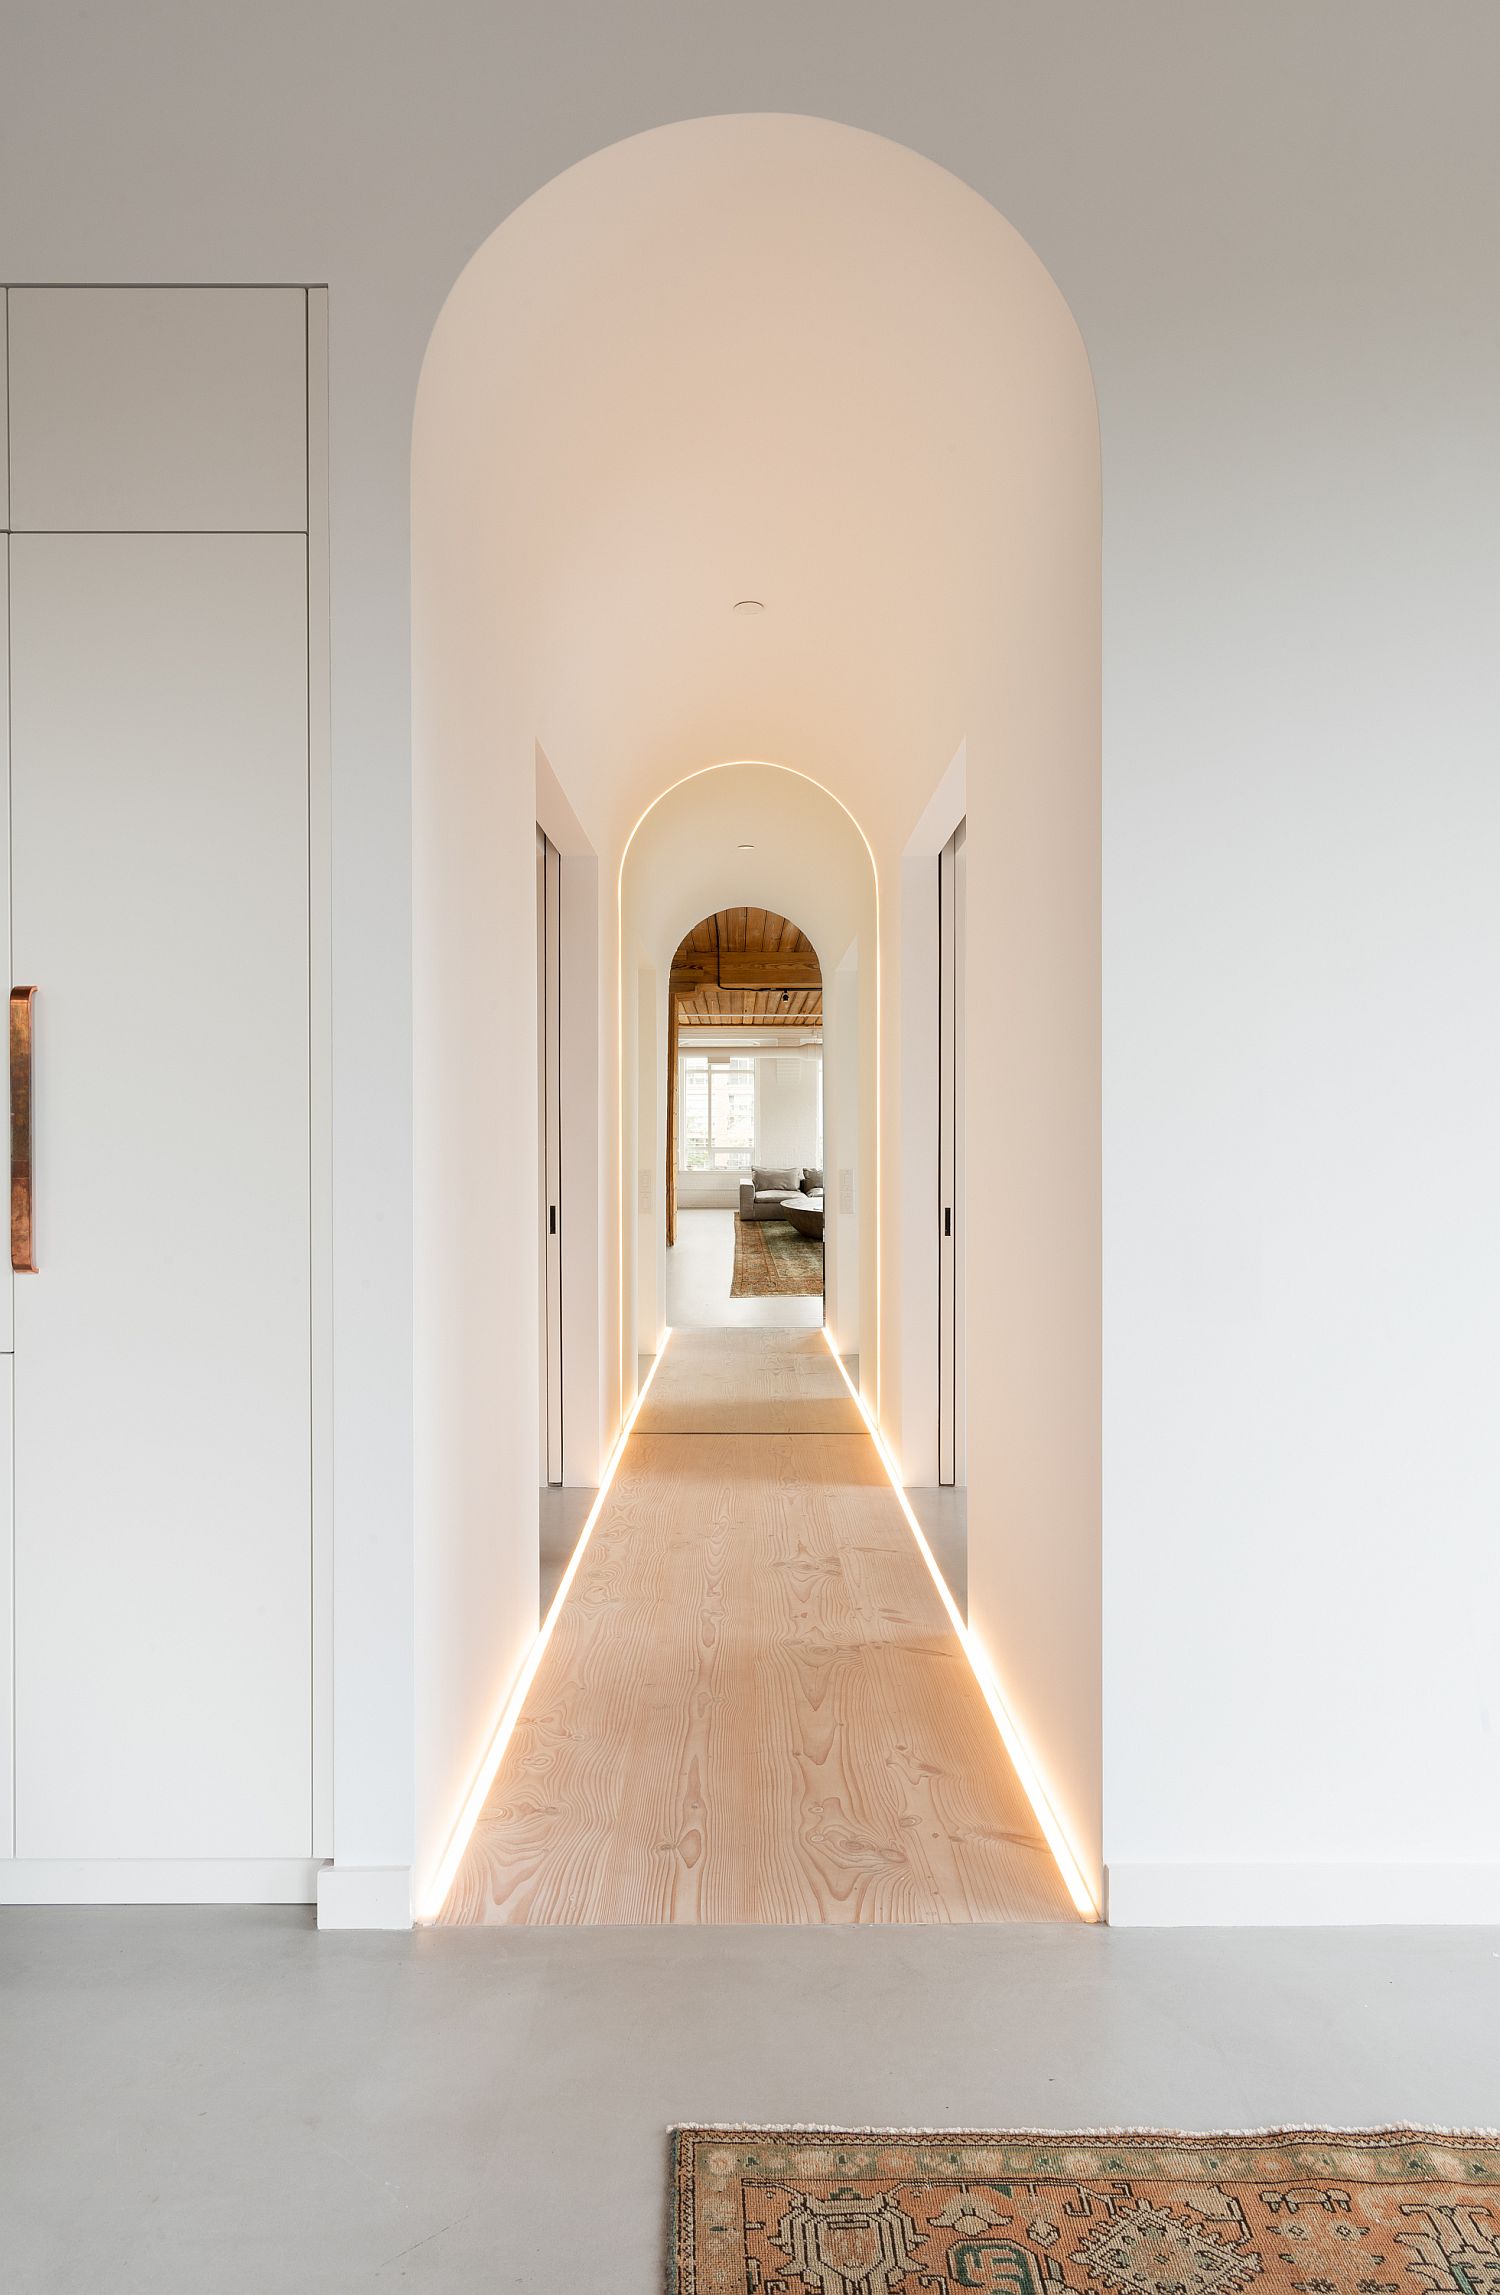 Strip-LED-lighting-and-archways-create-a-beautiful-interior